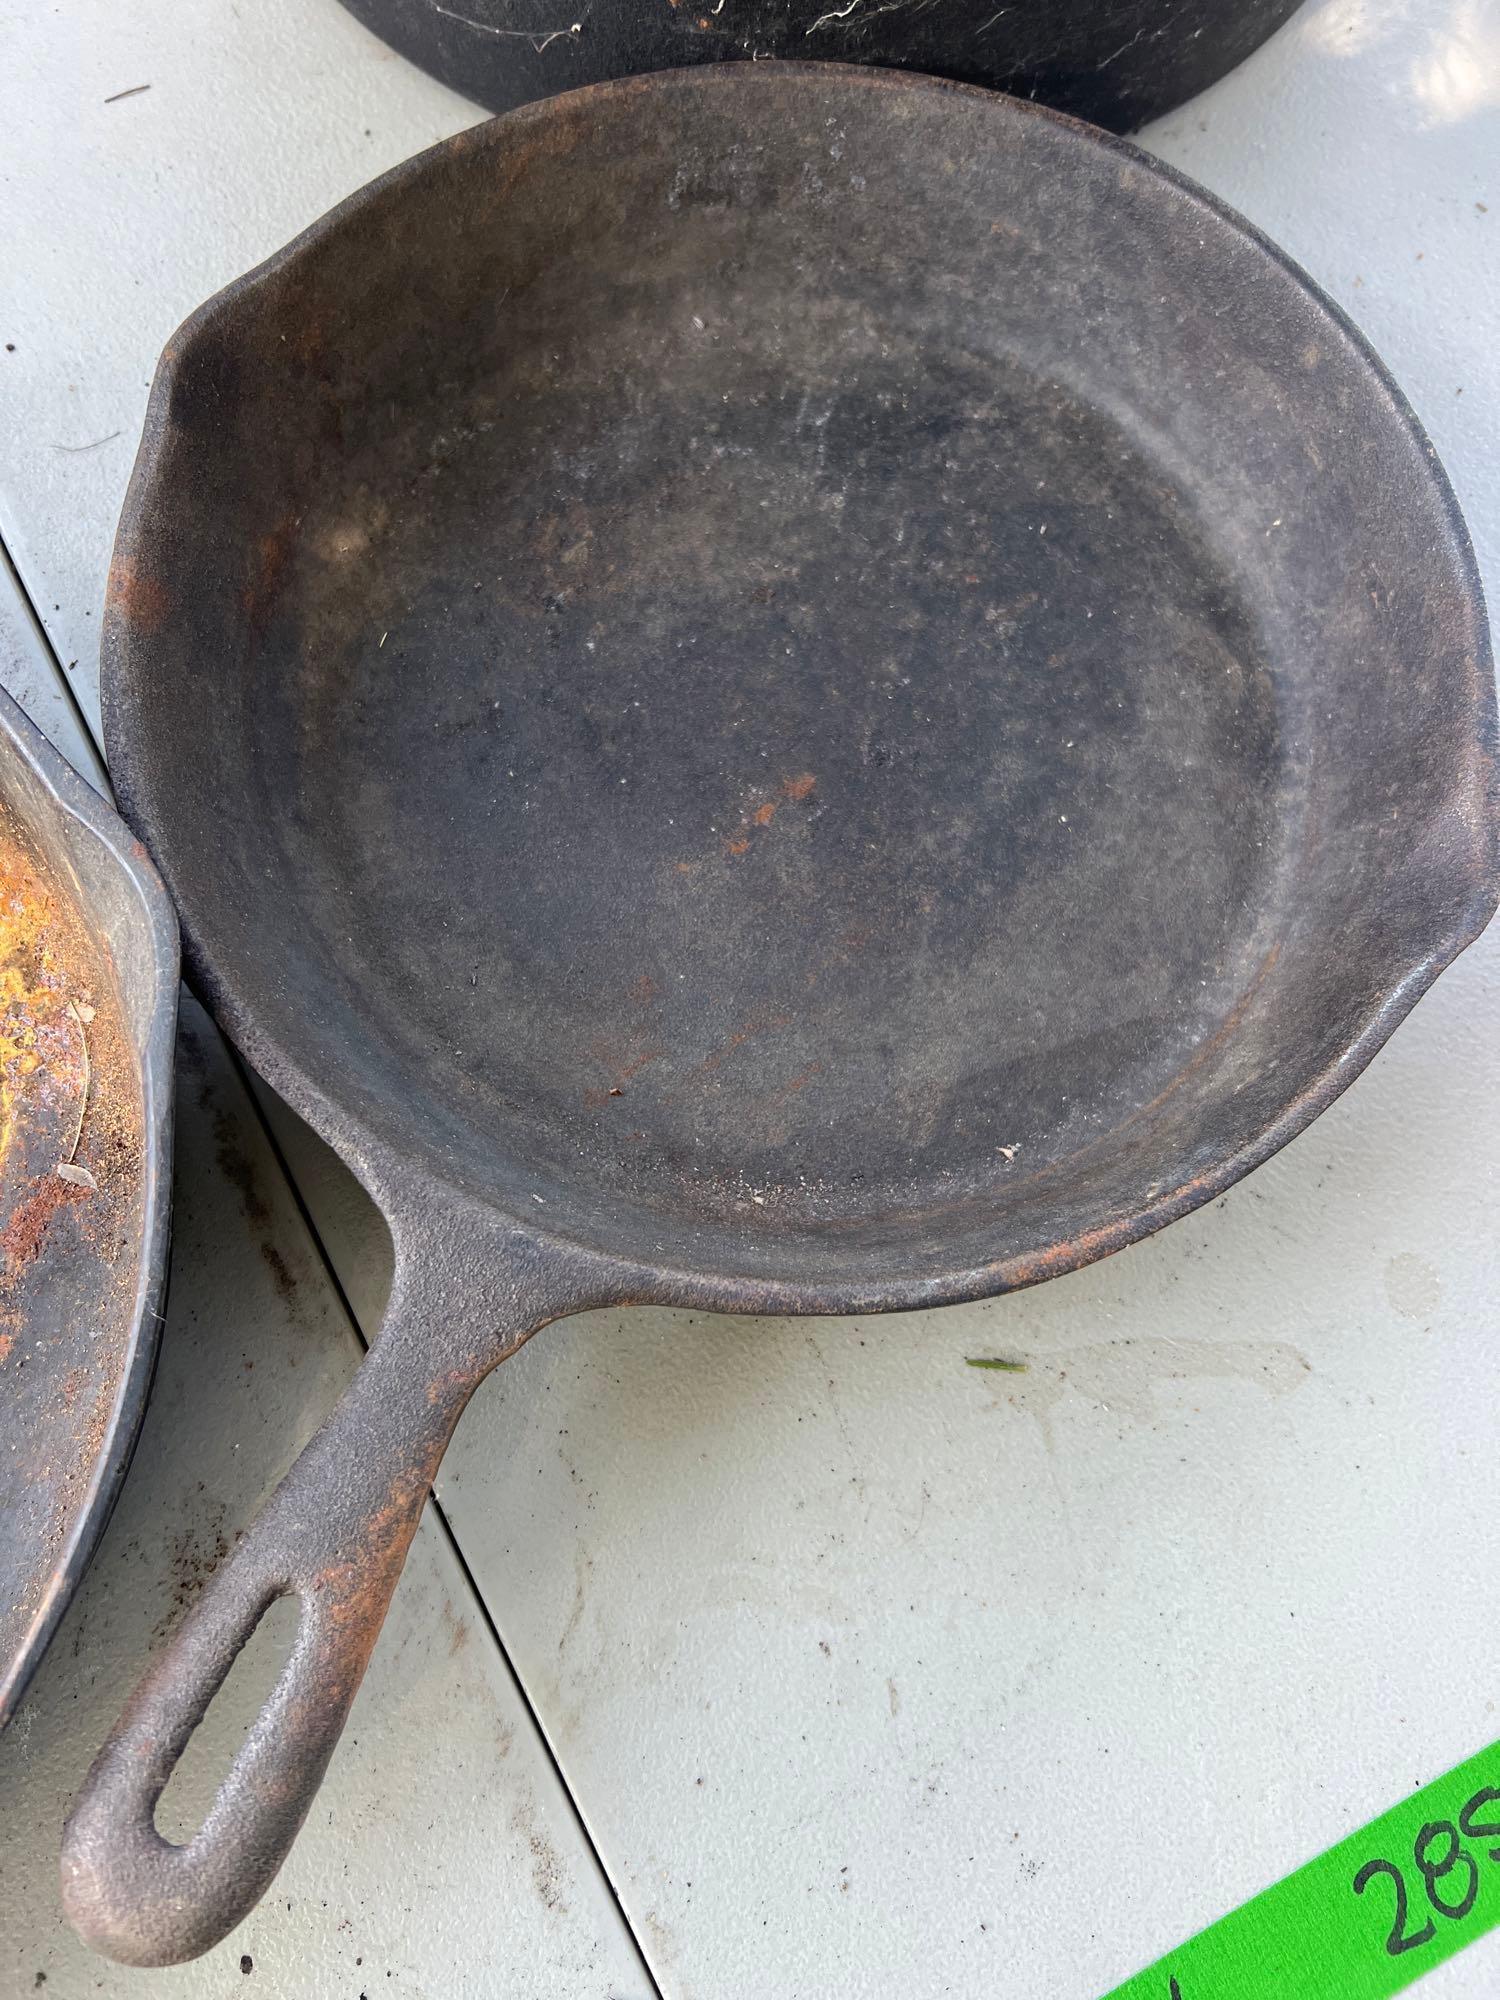 large lot of camping cast iron skillets pot and rod iron hangers